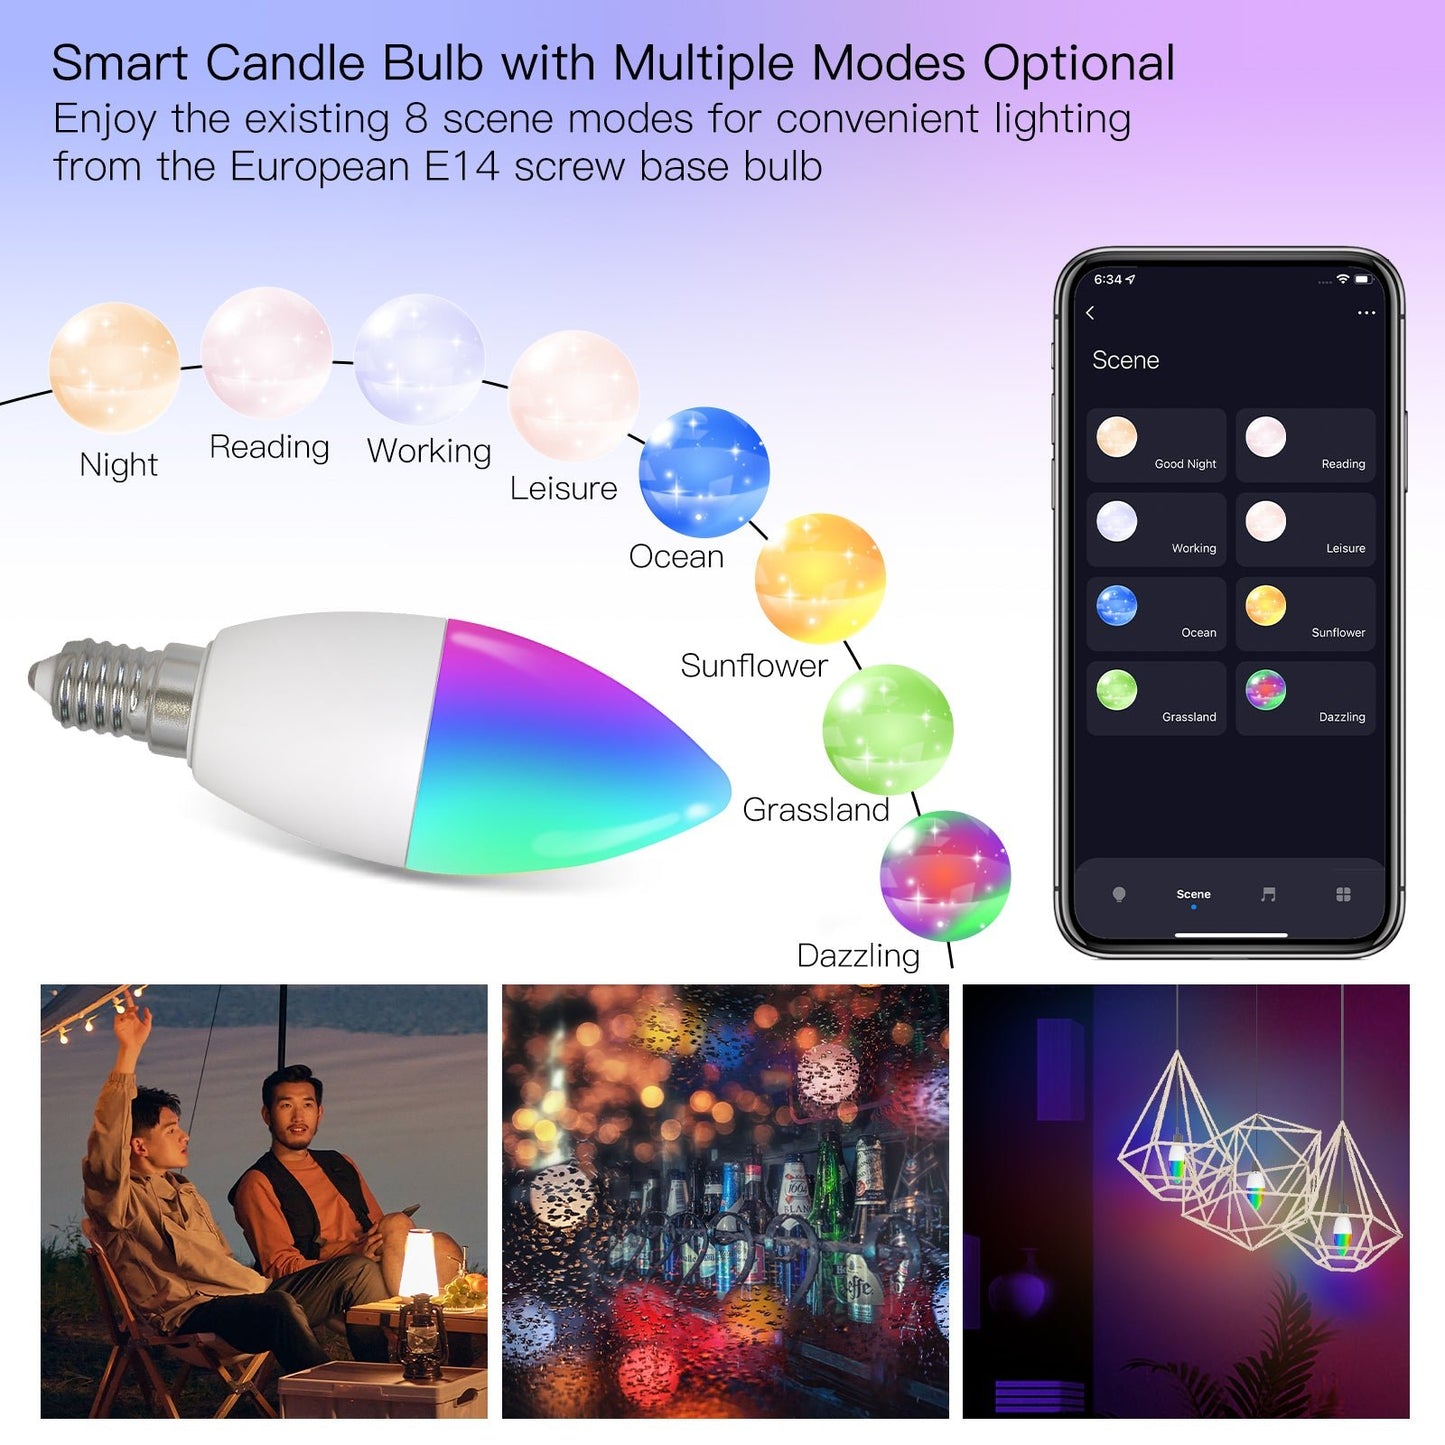 Smart Candle Bulb with Multiple Modes Optional - MOES